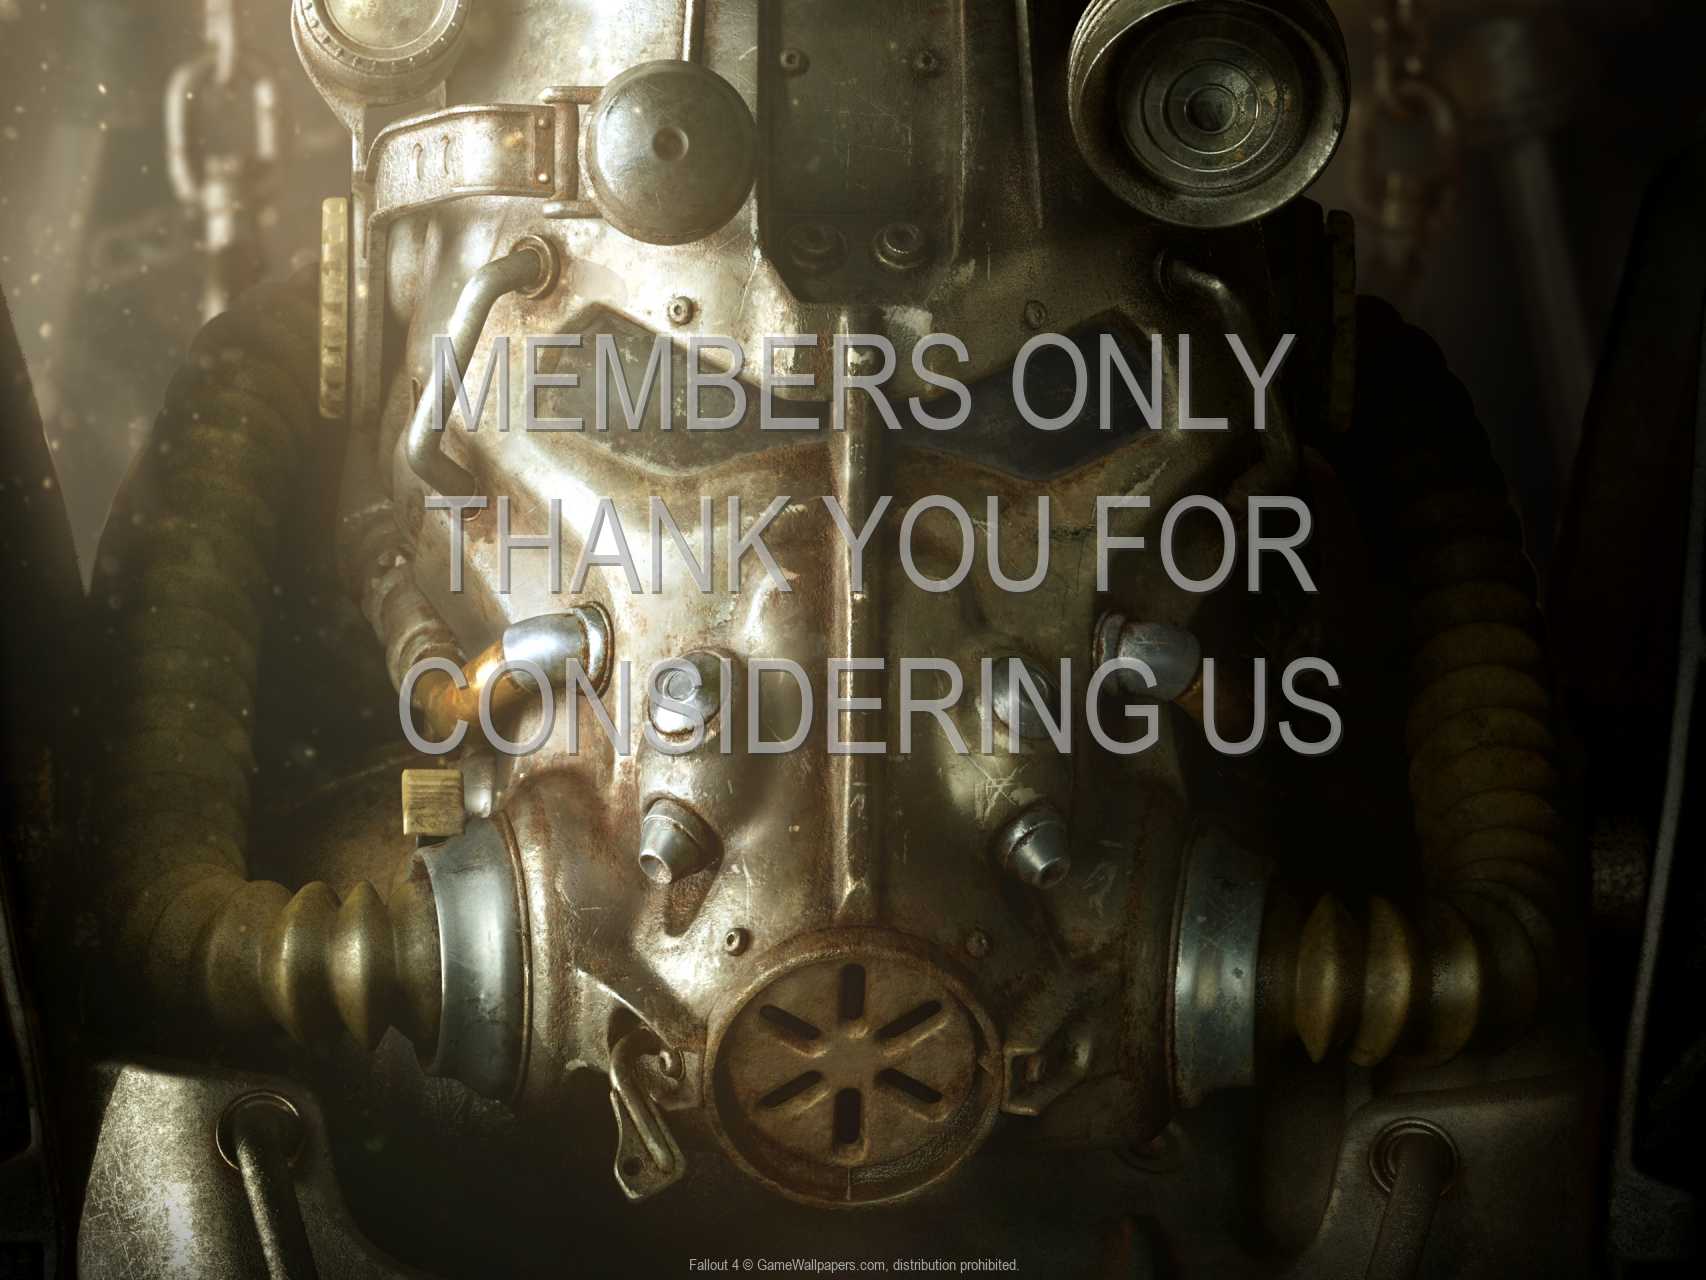 Fallout 4 720p Horizontal Mobile wallpaper or background 11